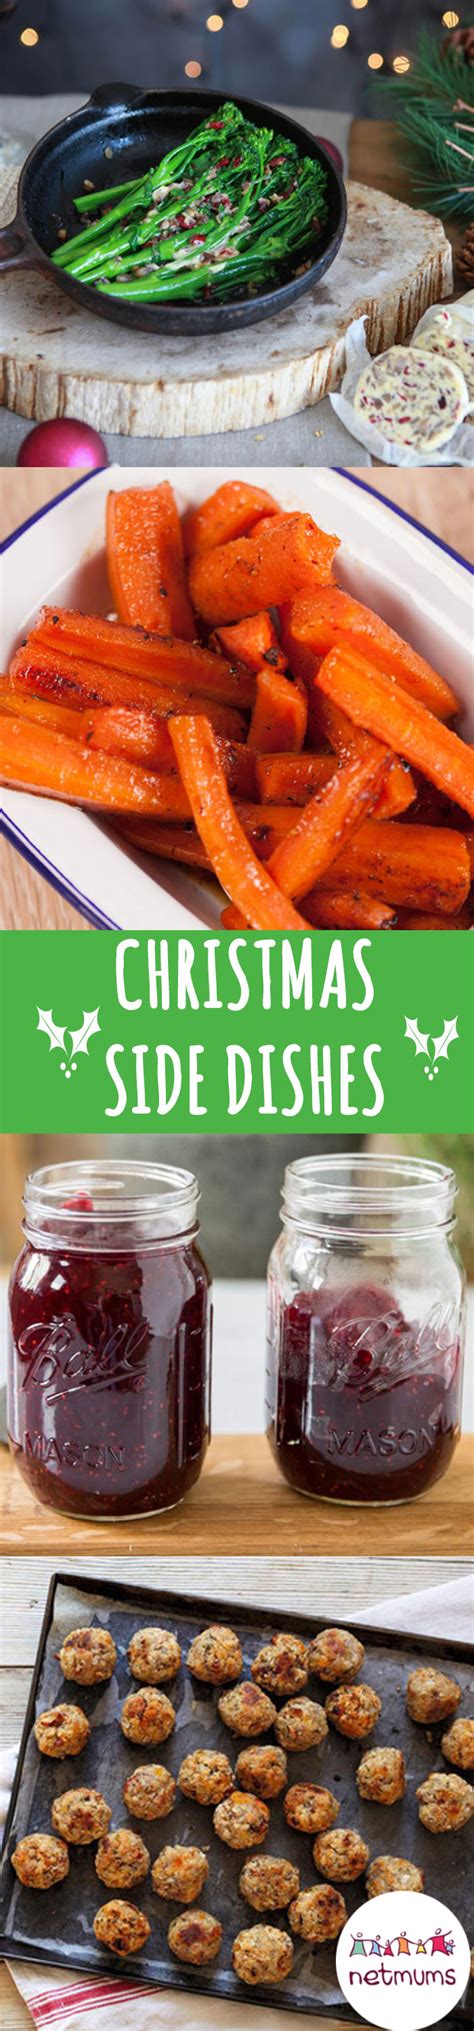 Are you good at making traditional dishes at new year and christmas? Easy Christmas vegetable and side dish ideas | Side dishes, Christmas side dishes, Dinner recipes